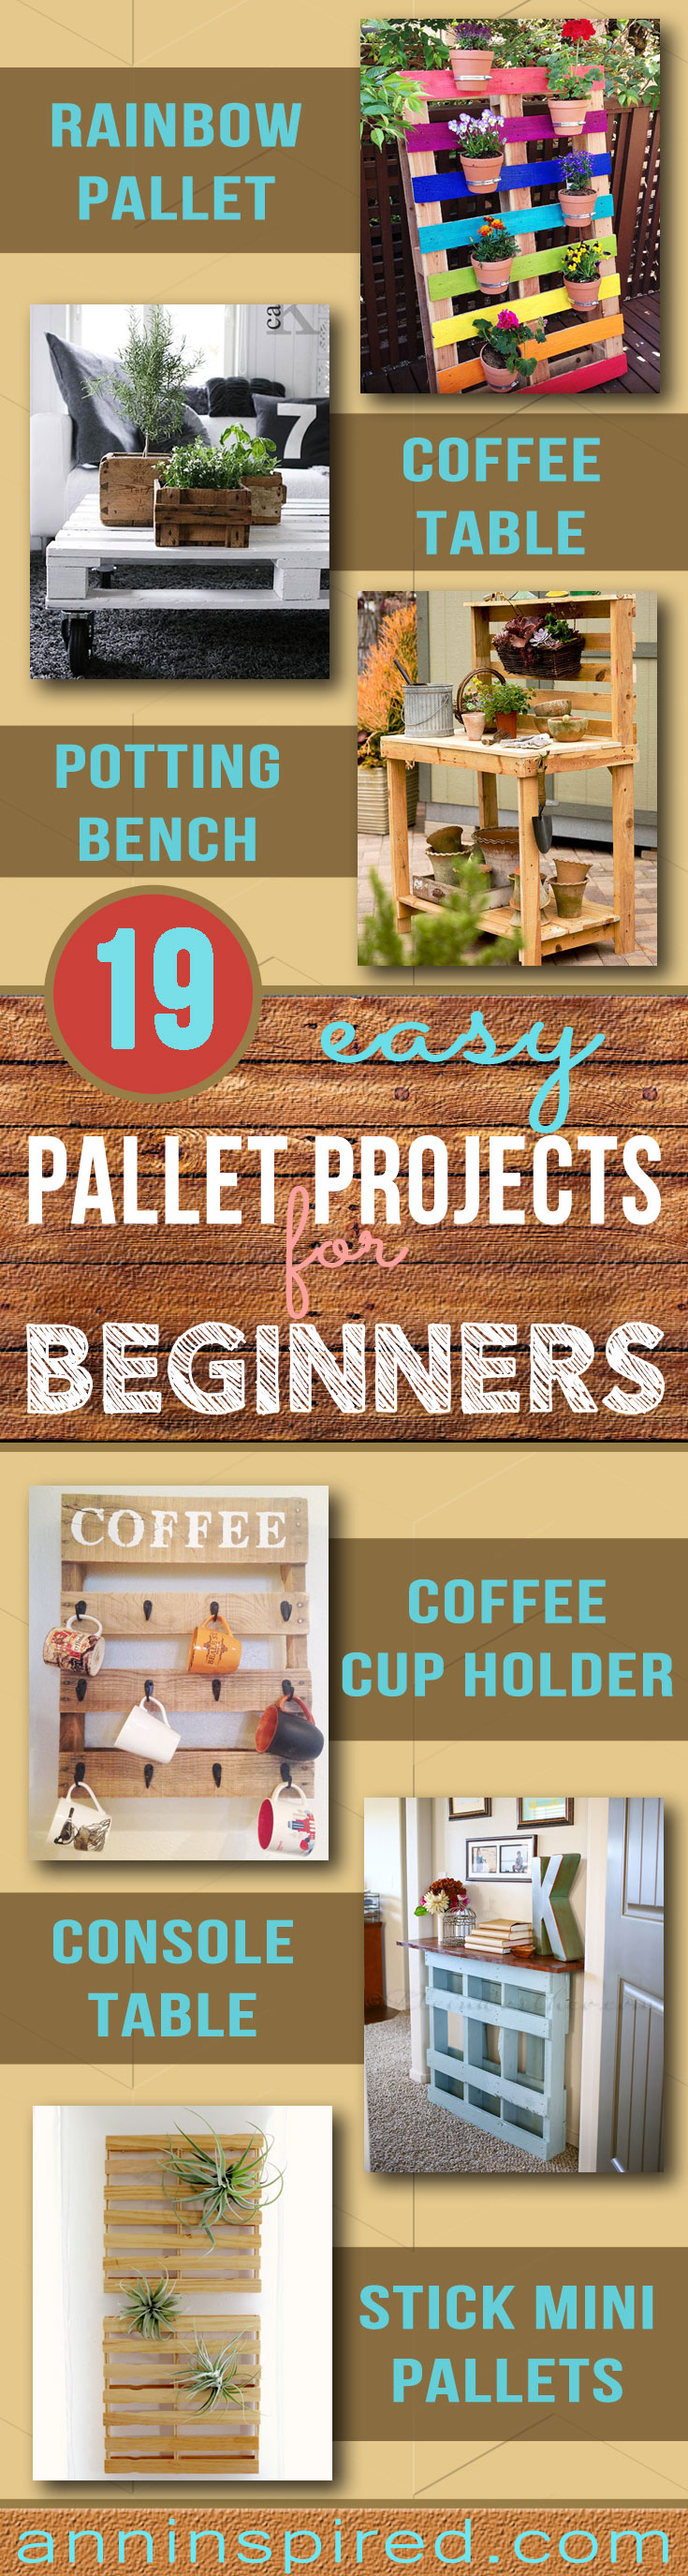 19 Easy Pallet Projects for Beginners